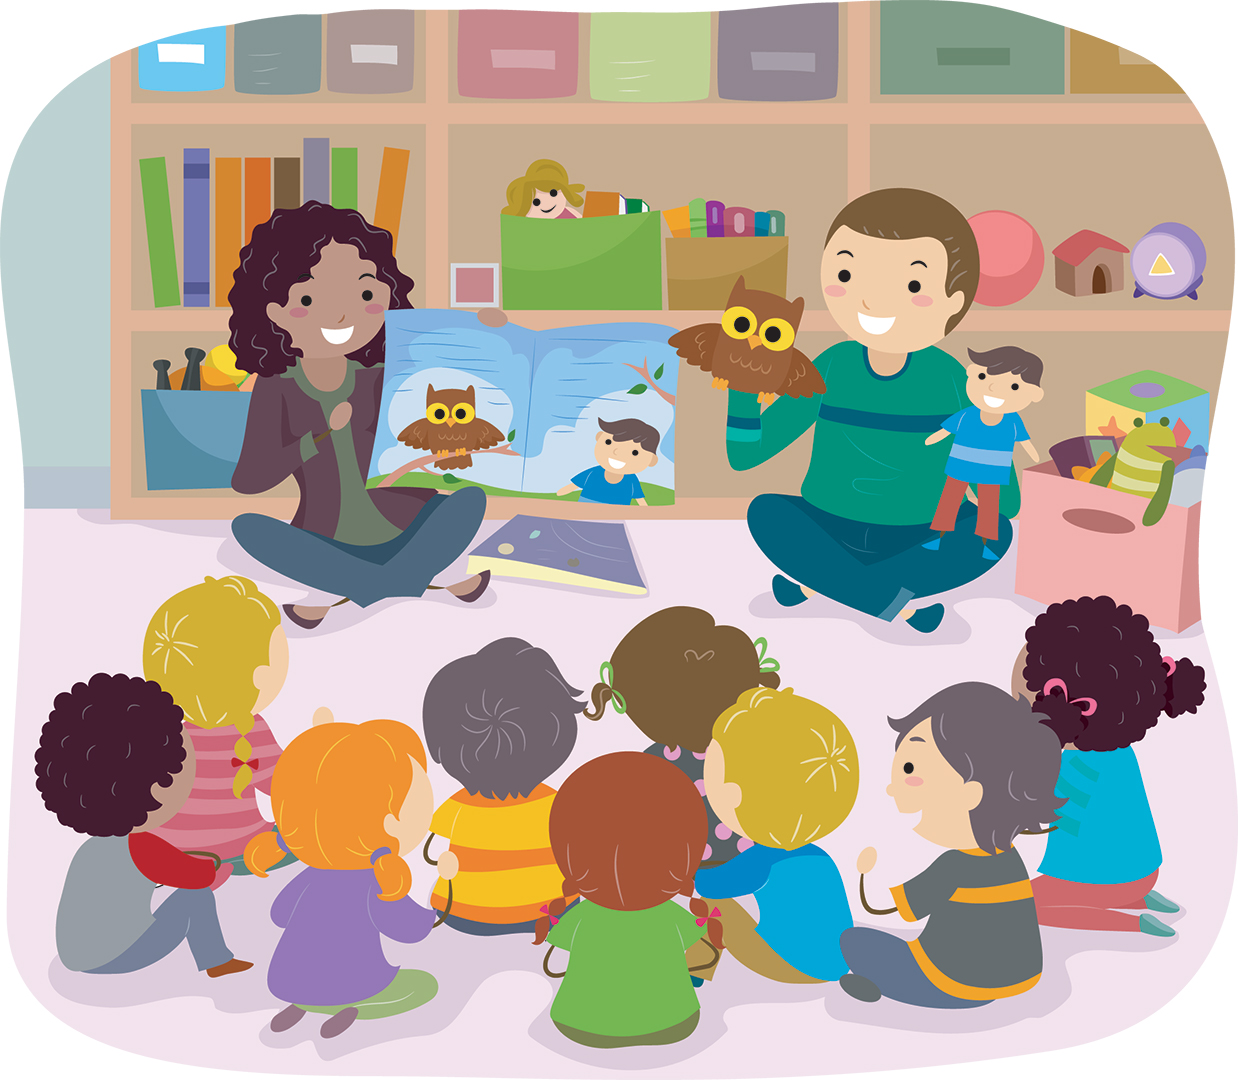 storytime clipart family